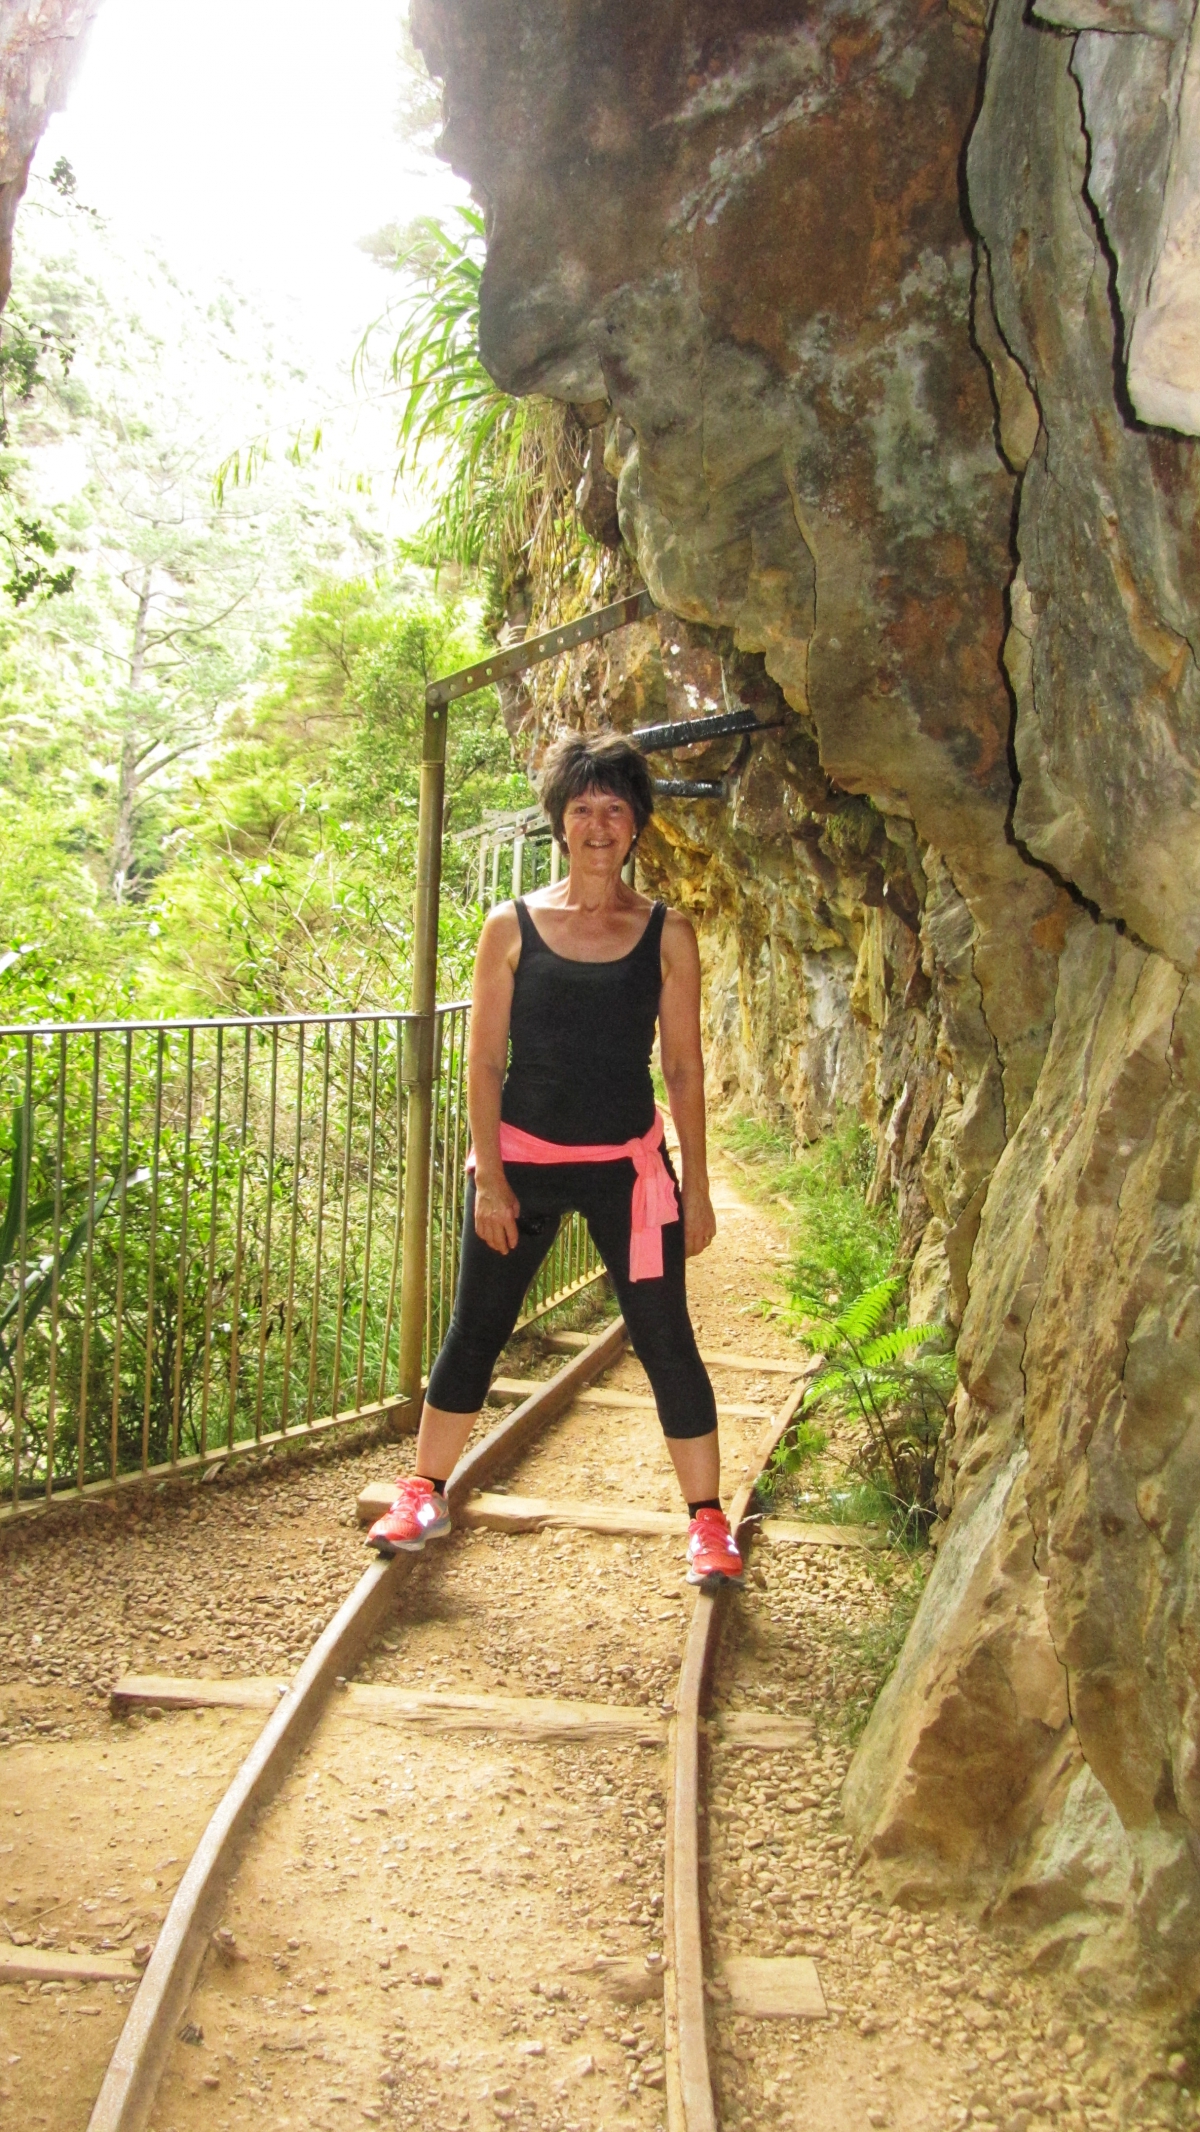 Photo of property: Drive to karangahake gorge, cross the swing bridge and start the "windows walk" where you will explore historic gold mining tunnels and walk the River deep in the gorge